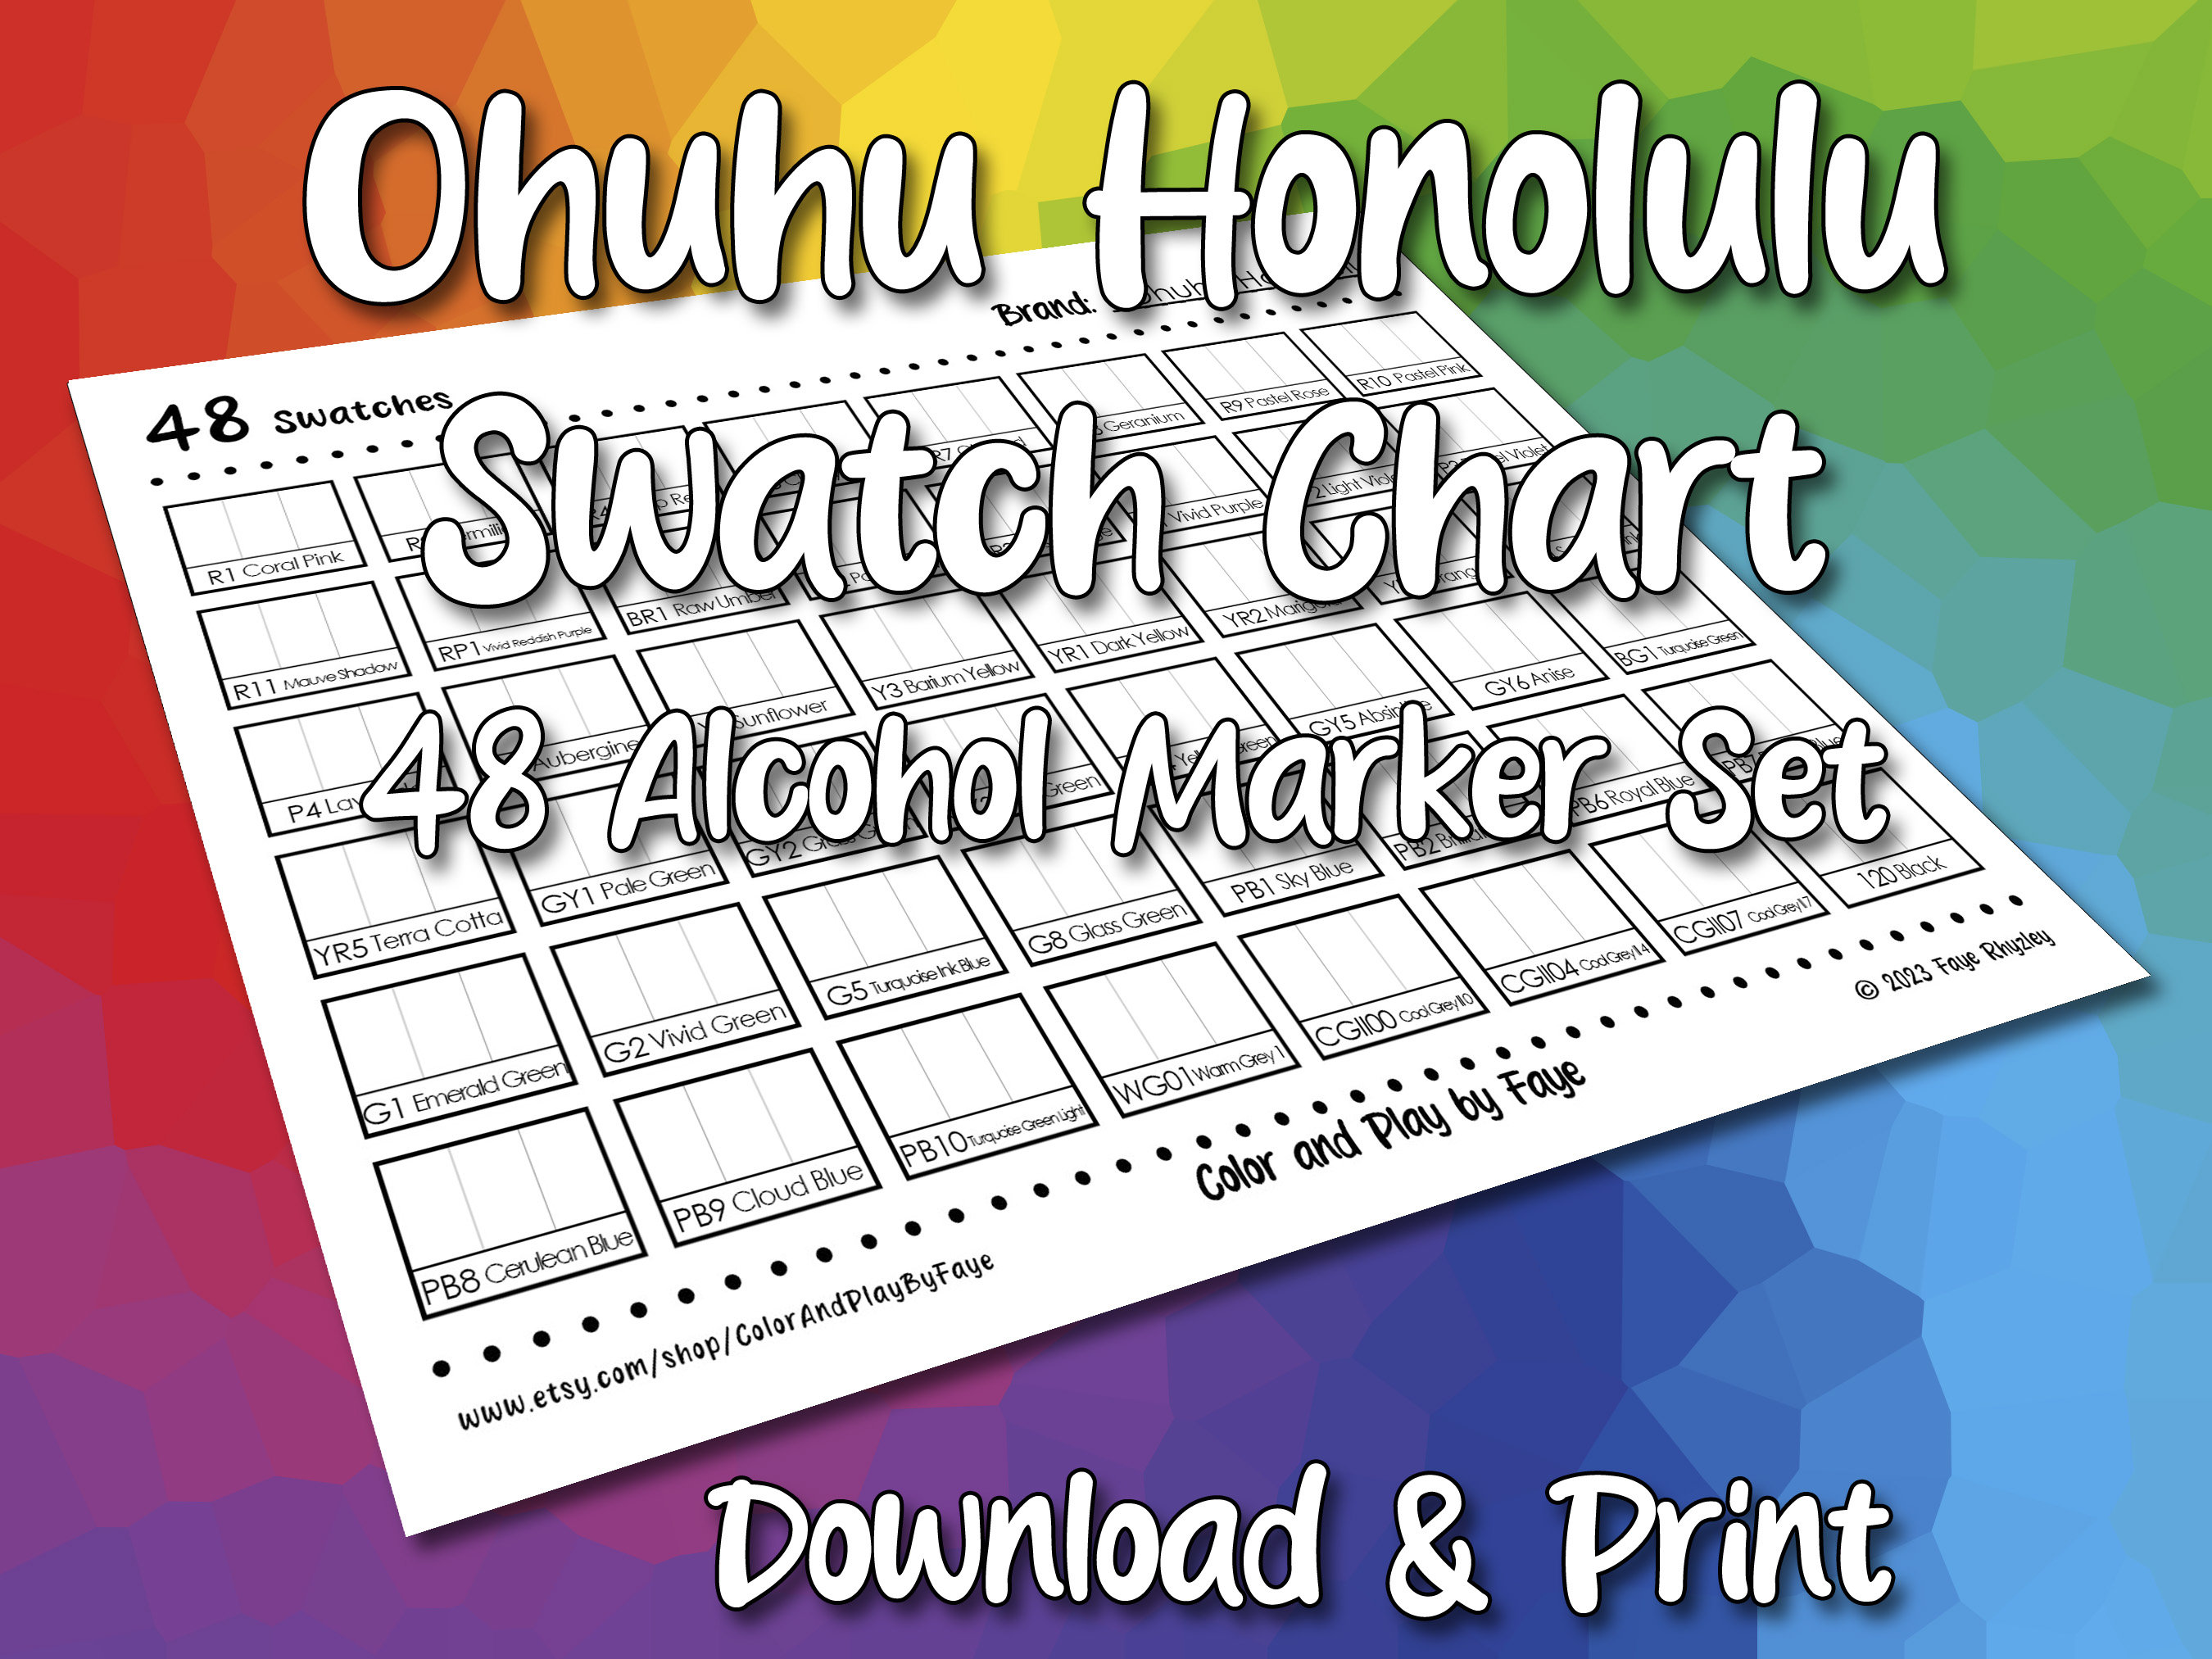 Digital PDF Ohuhu Honolulu 320 Colors Art Marker Set Swatch Template DIY  4-page Color Swatch Printable Template Instant Download -  Finland